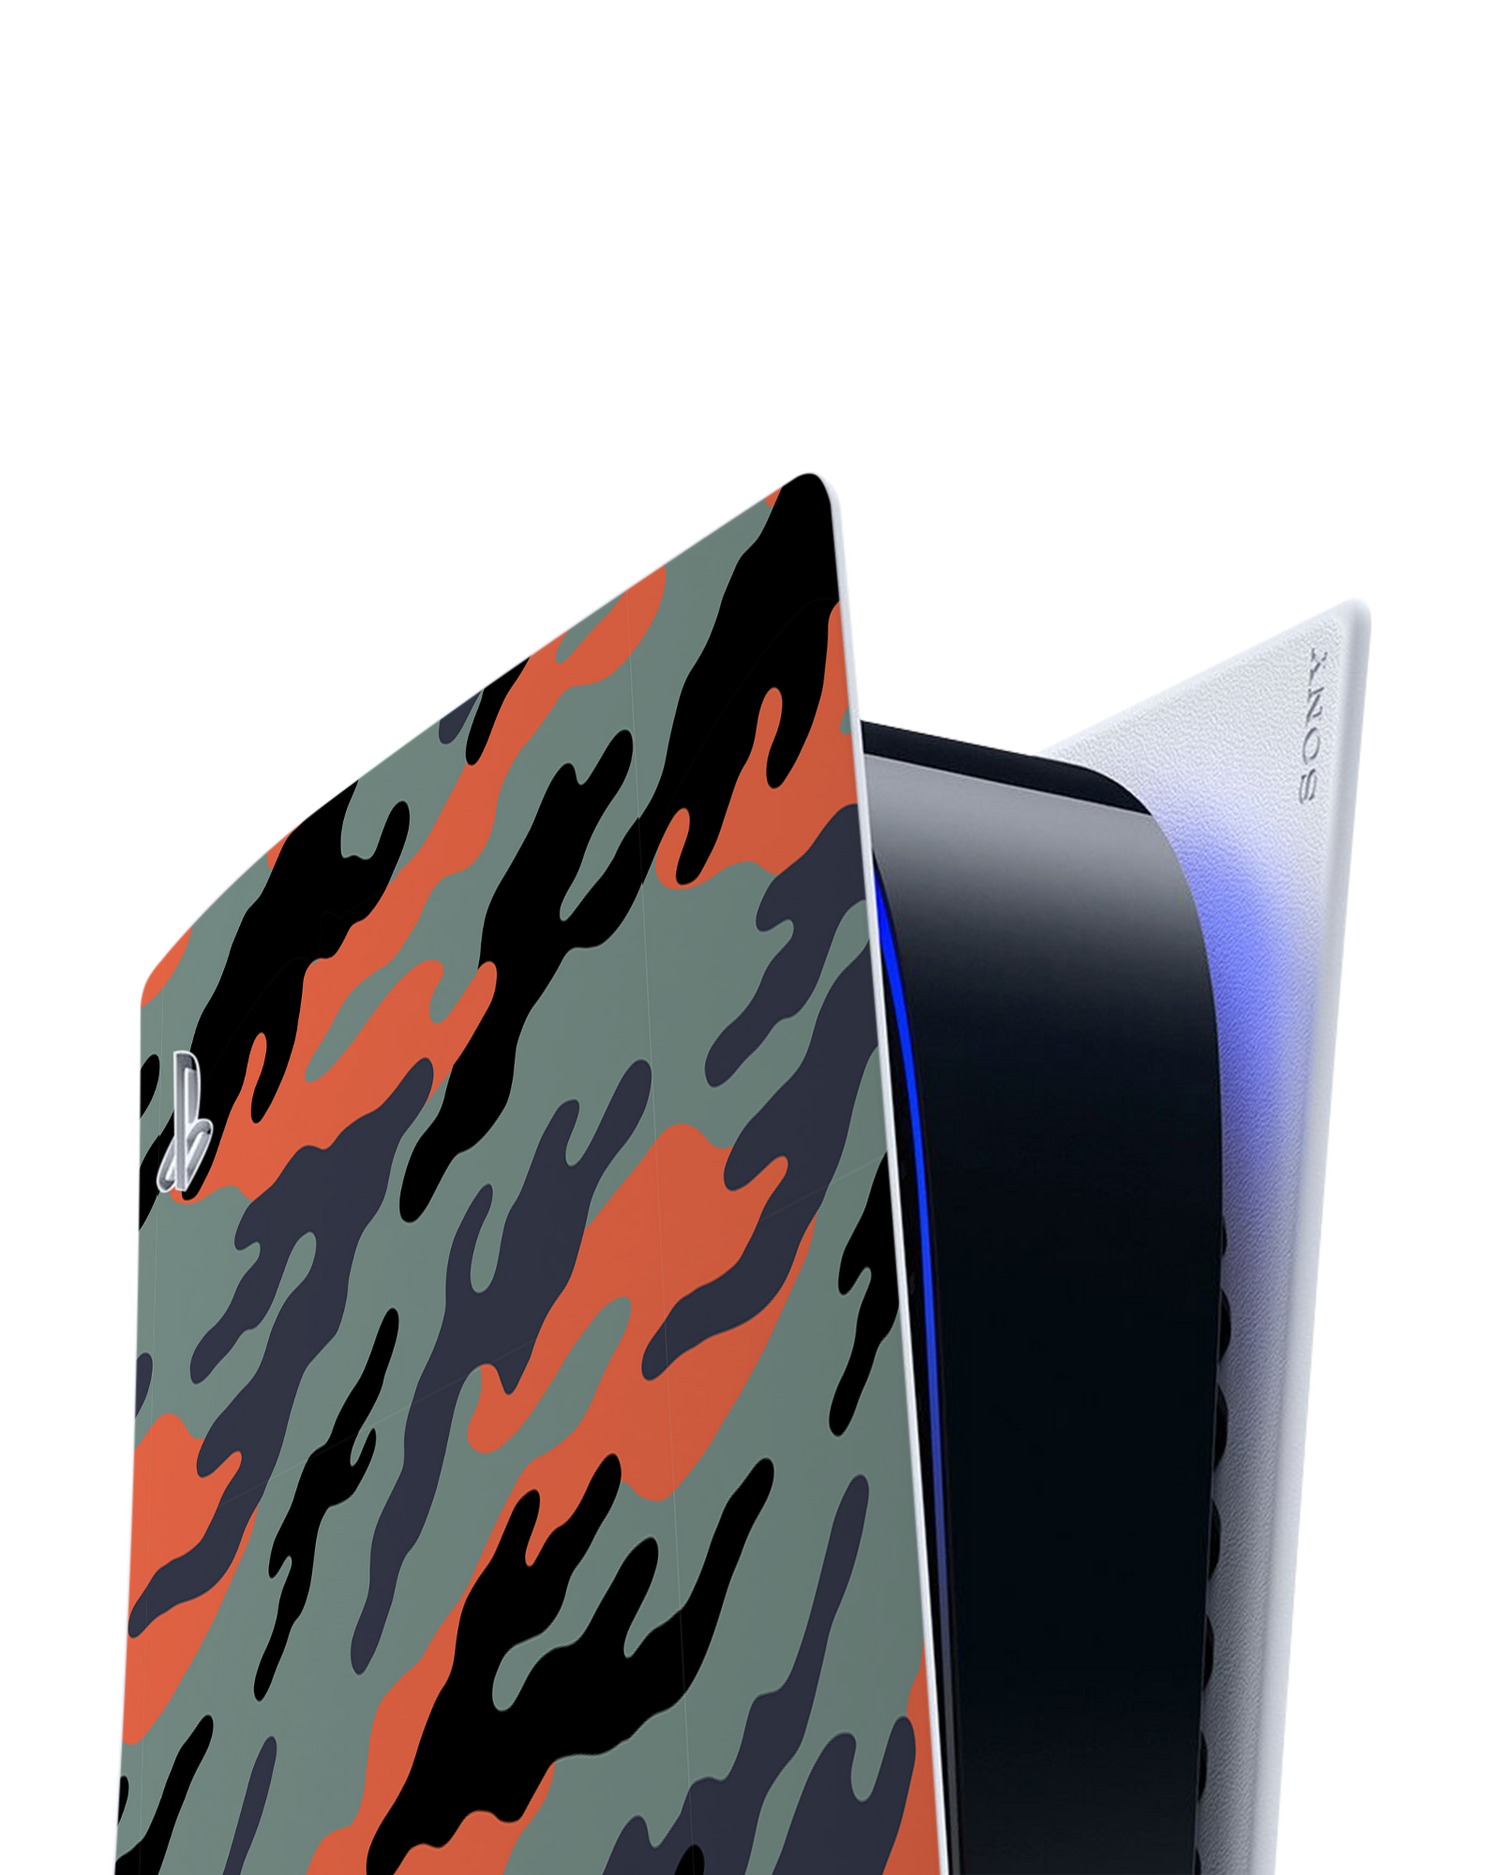 Camo Sunset Console Skin for Sony PlayStation 5: Detail shot